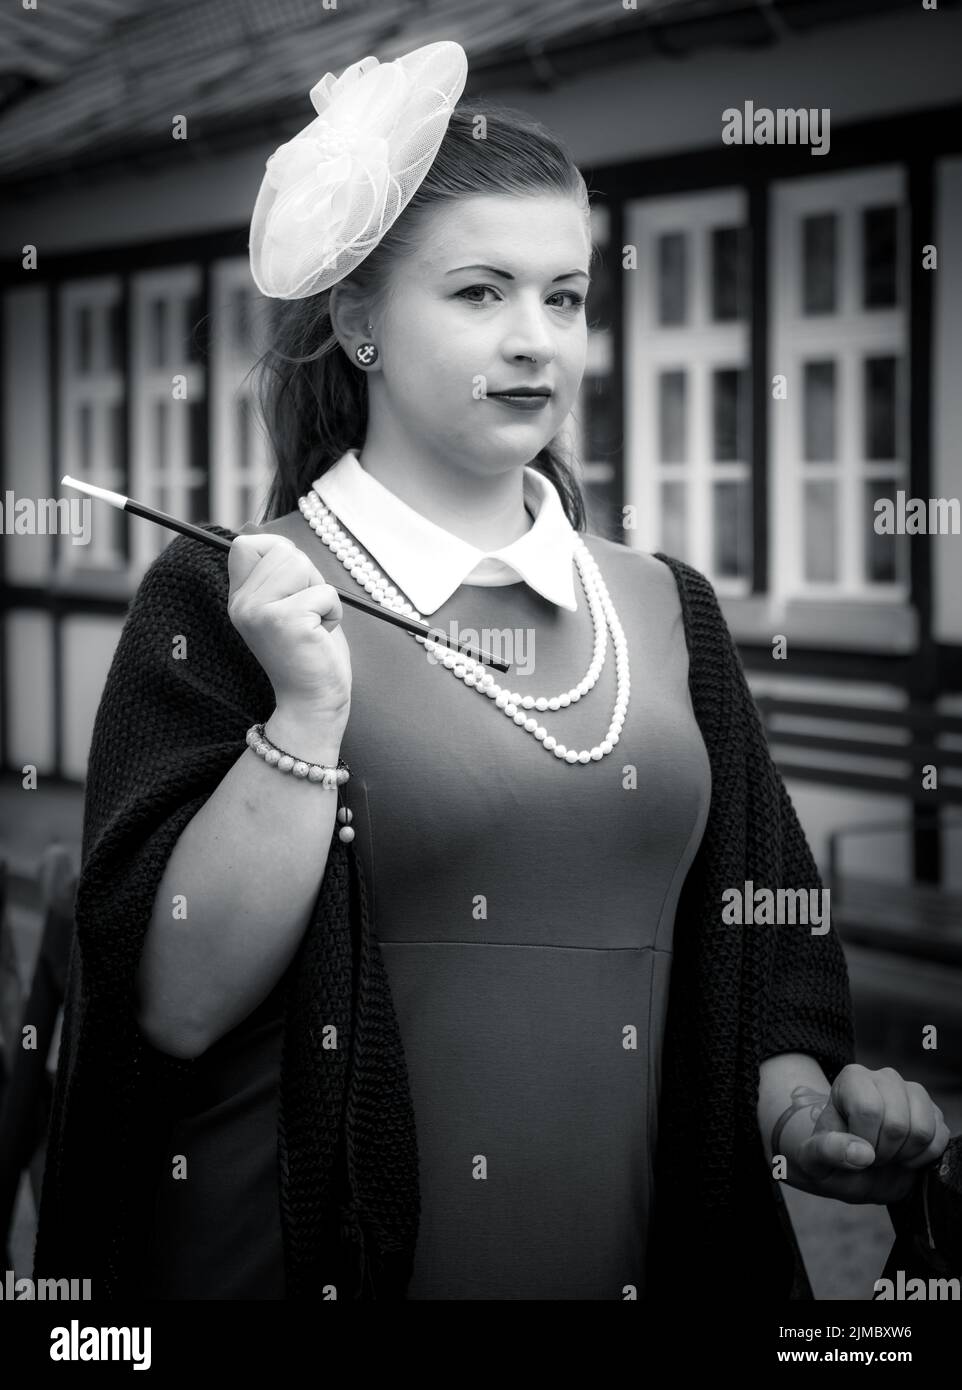 Attractive woman in vintage style clothes Stock Photo